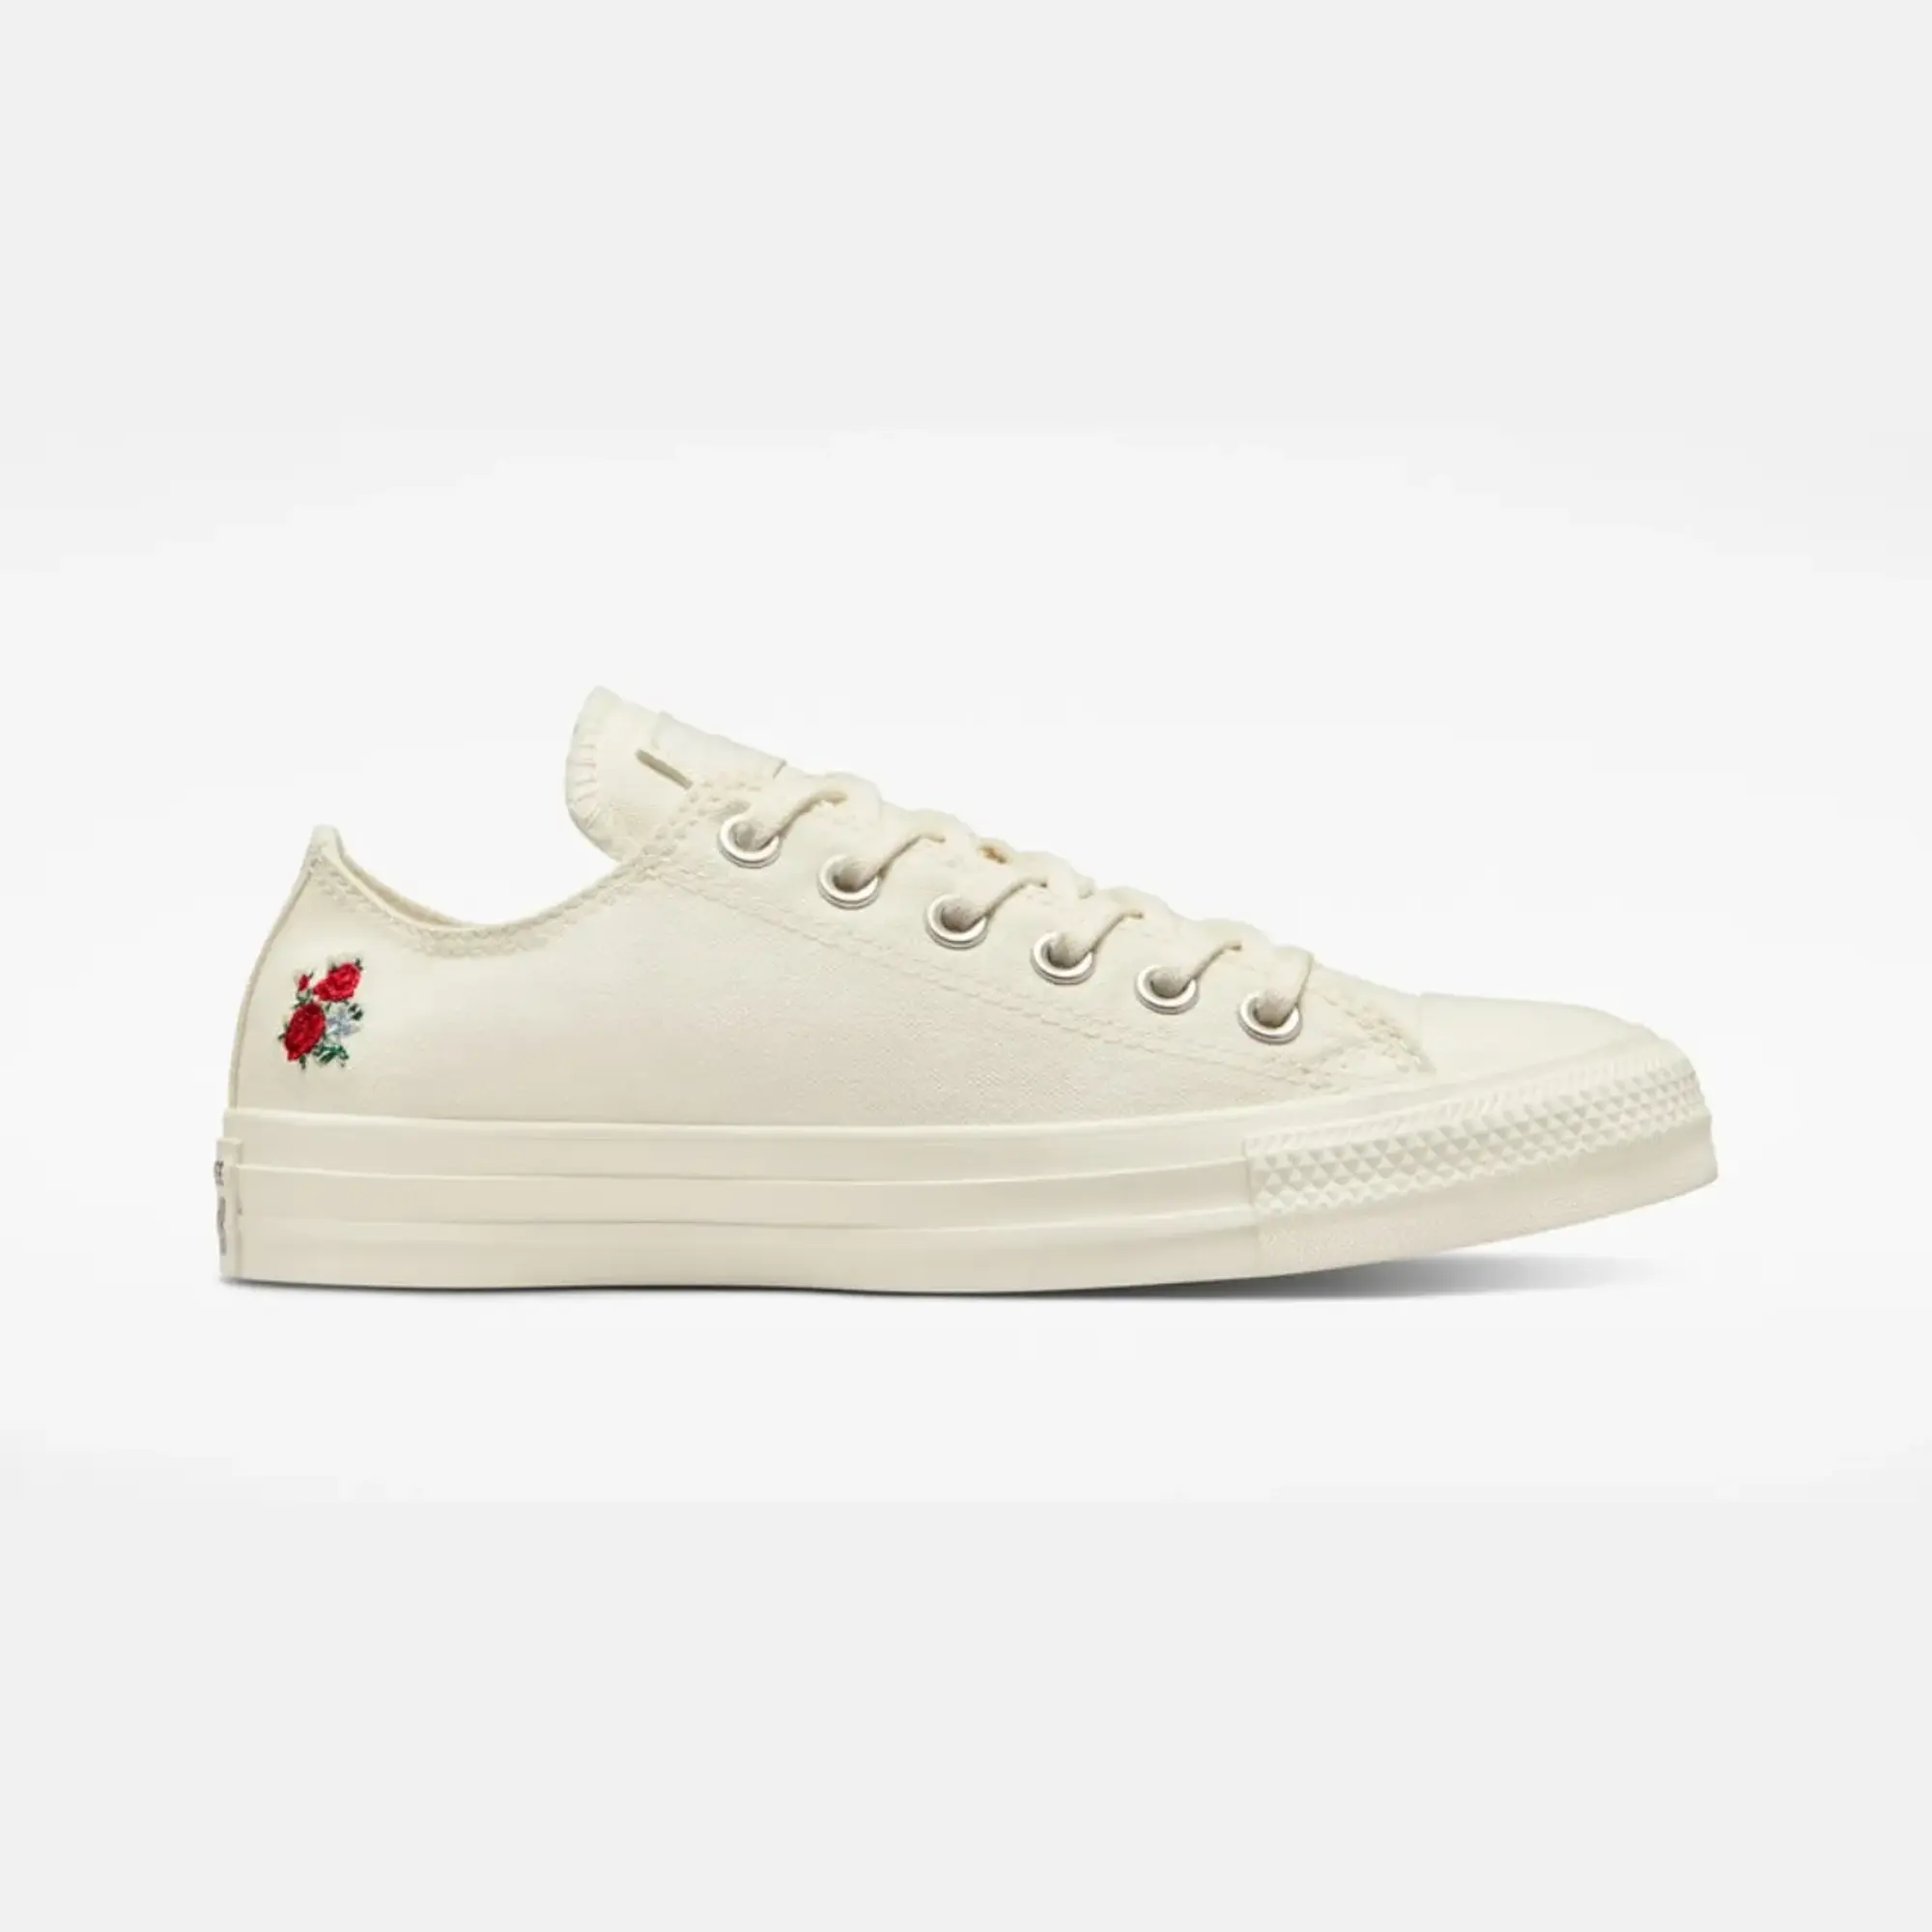 Converse all star embroidered floral trainers in white